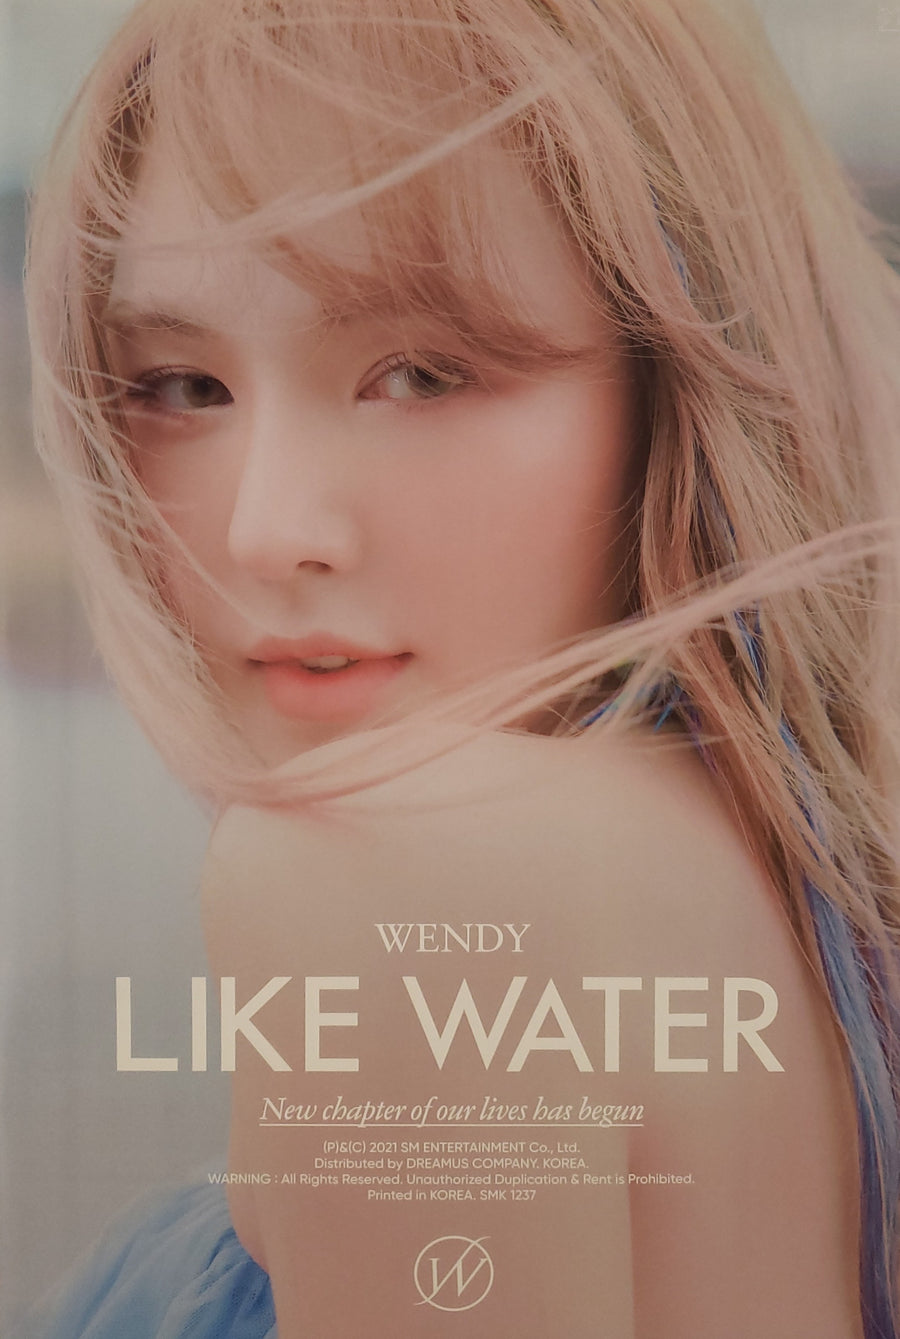 WENDY 1ST MINI ALBUM LIKE WATER (CASE VER) Official Poster - Photo Concept 2